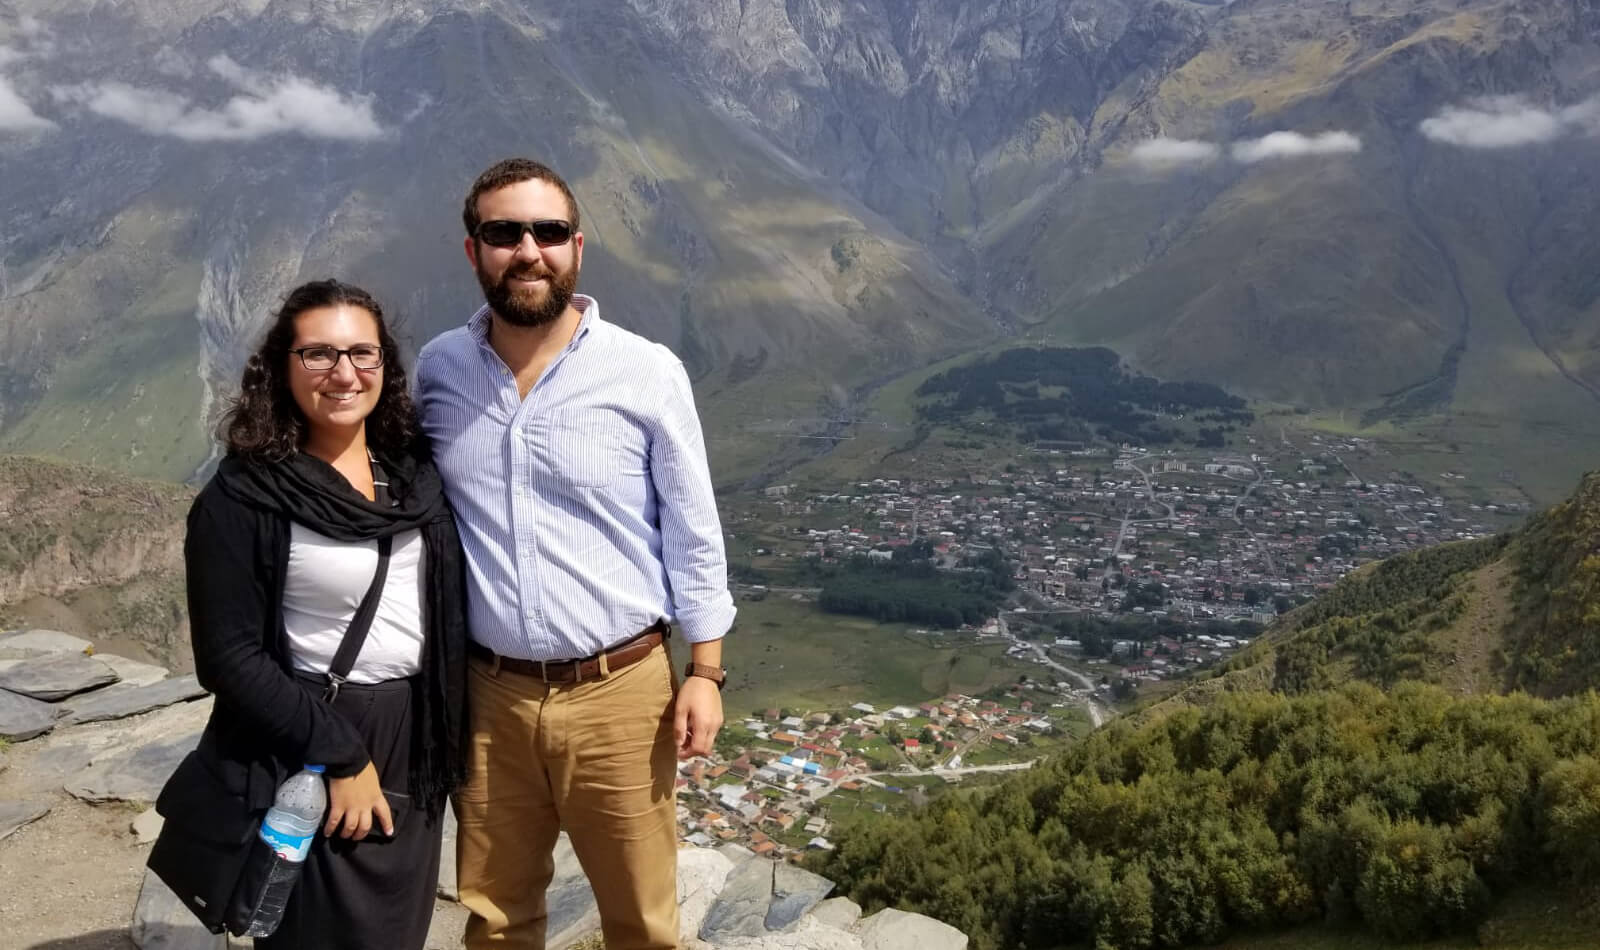 Daniela and her husband with a view of a city in Peru behind them. 